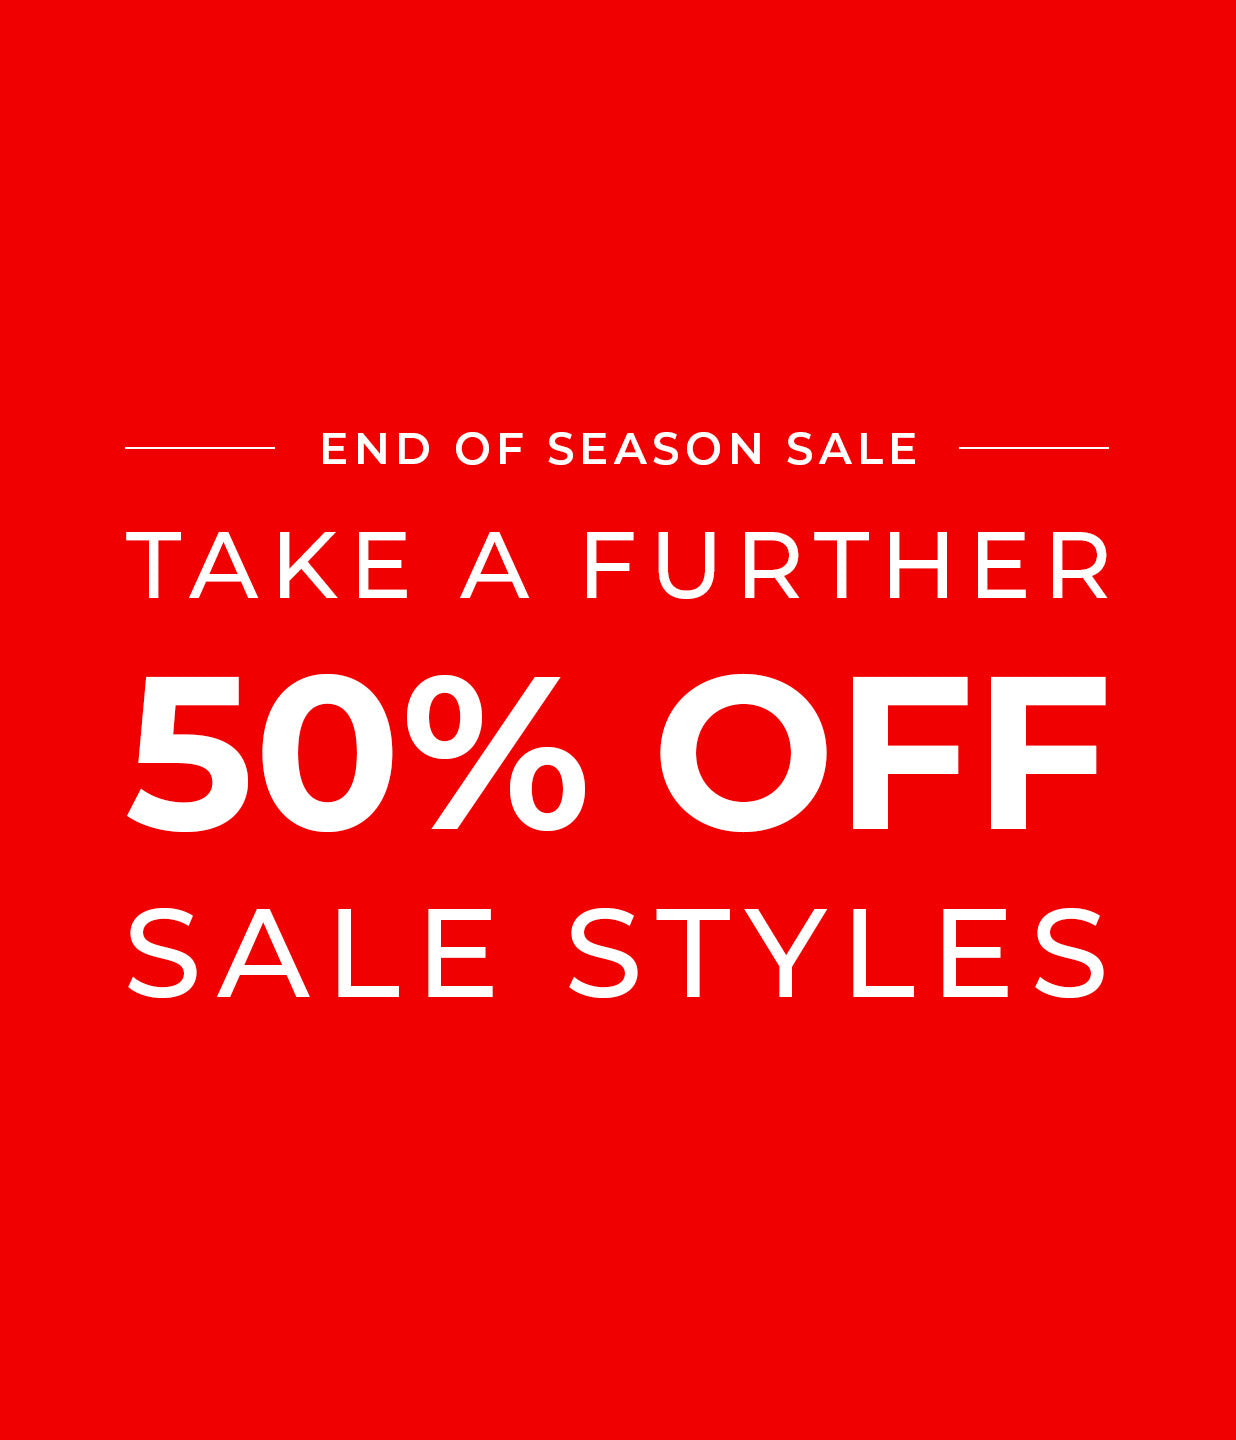 Extra 30% Off Sale Styles